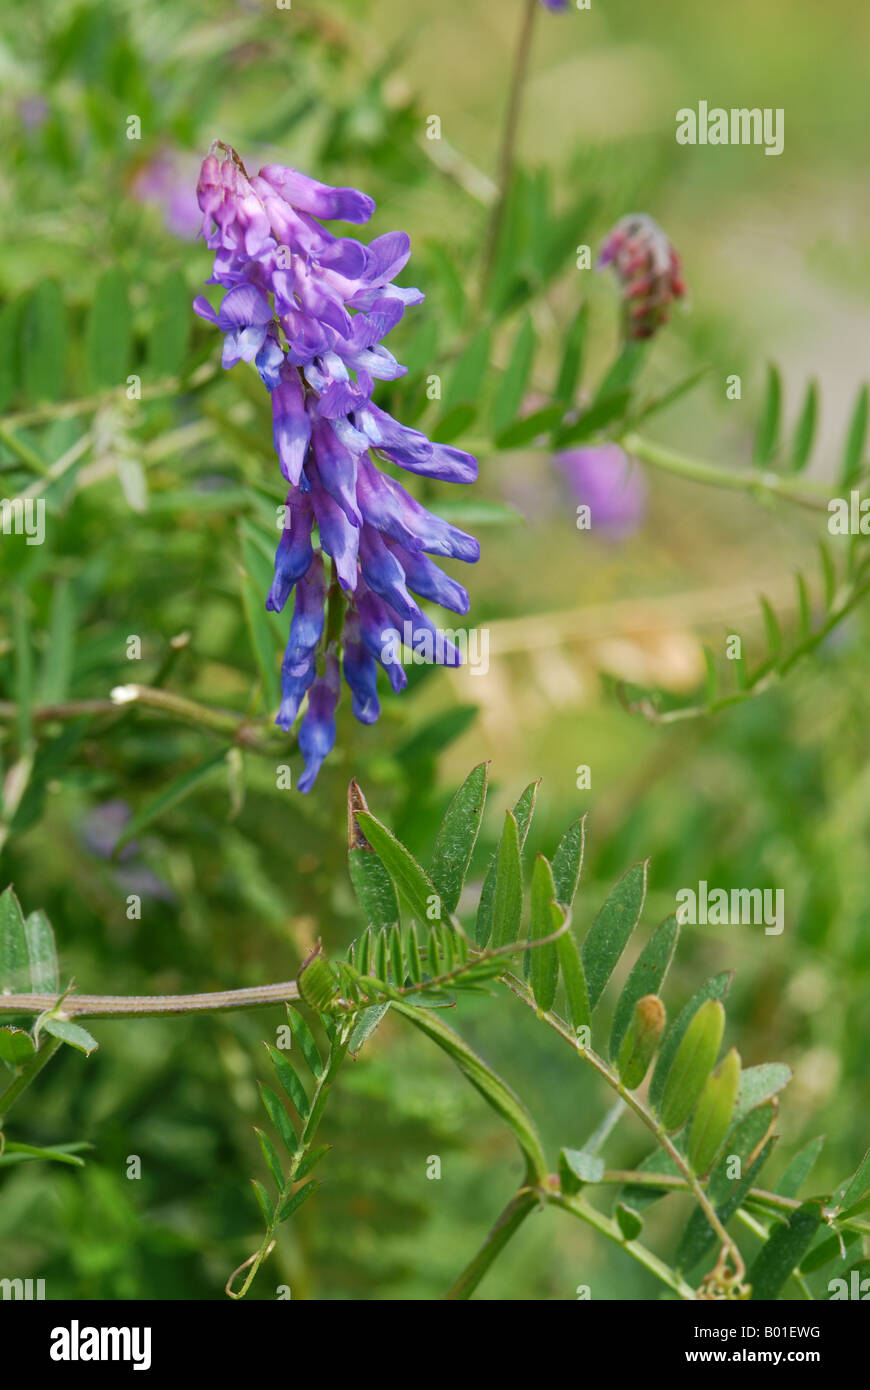 Tufted Vetch showing typical aspect of plant Stock Photo